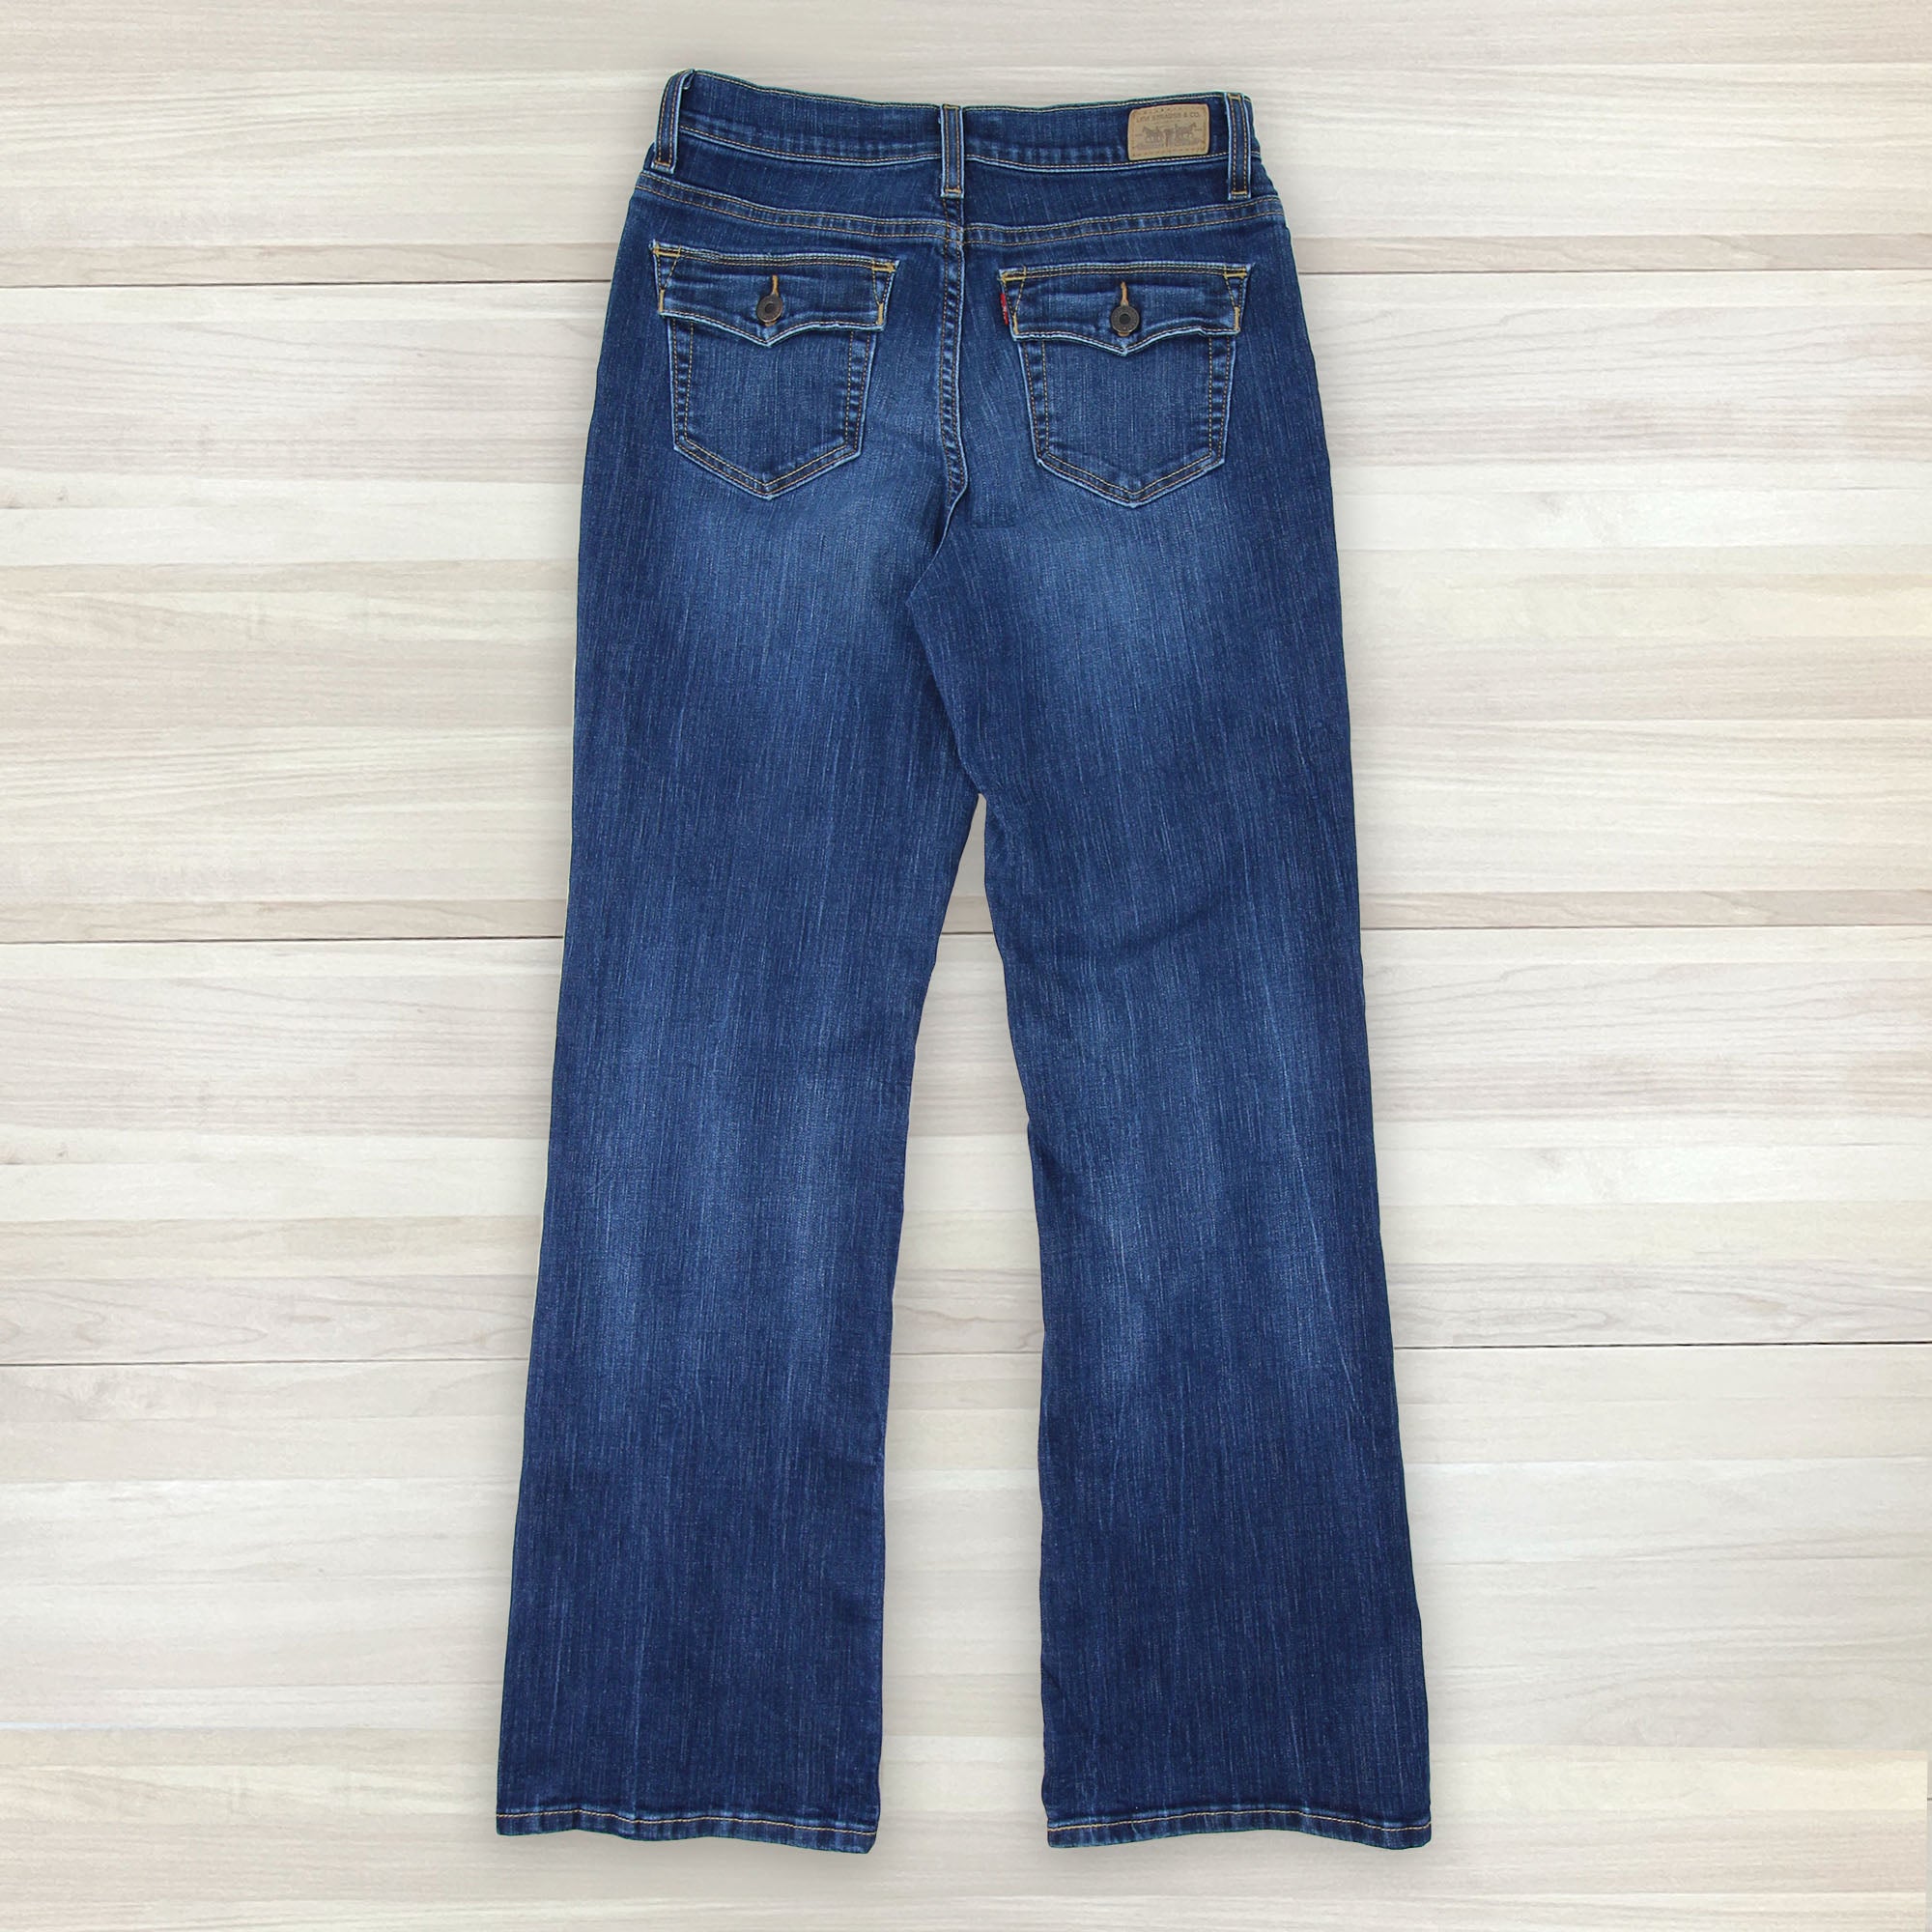 Women's Levi's 512 Perfectly Slimming Boot Cut - Size 10 Great Lakes Reclaimed Denim